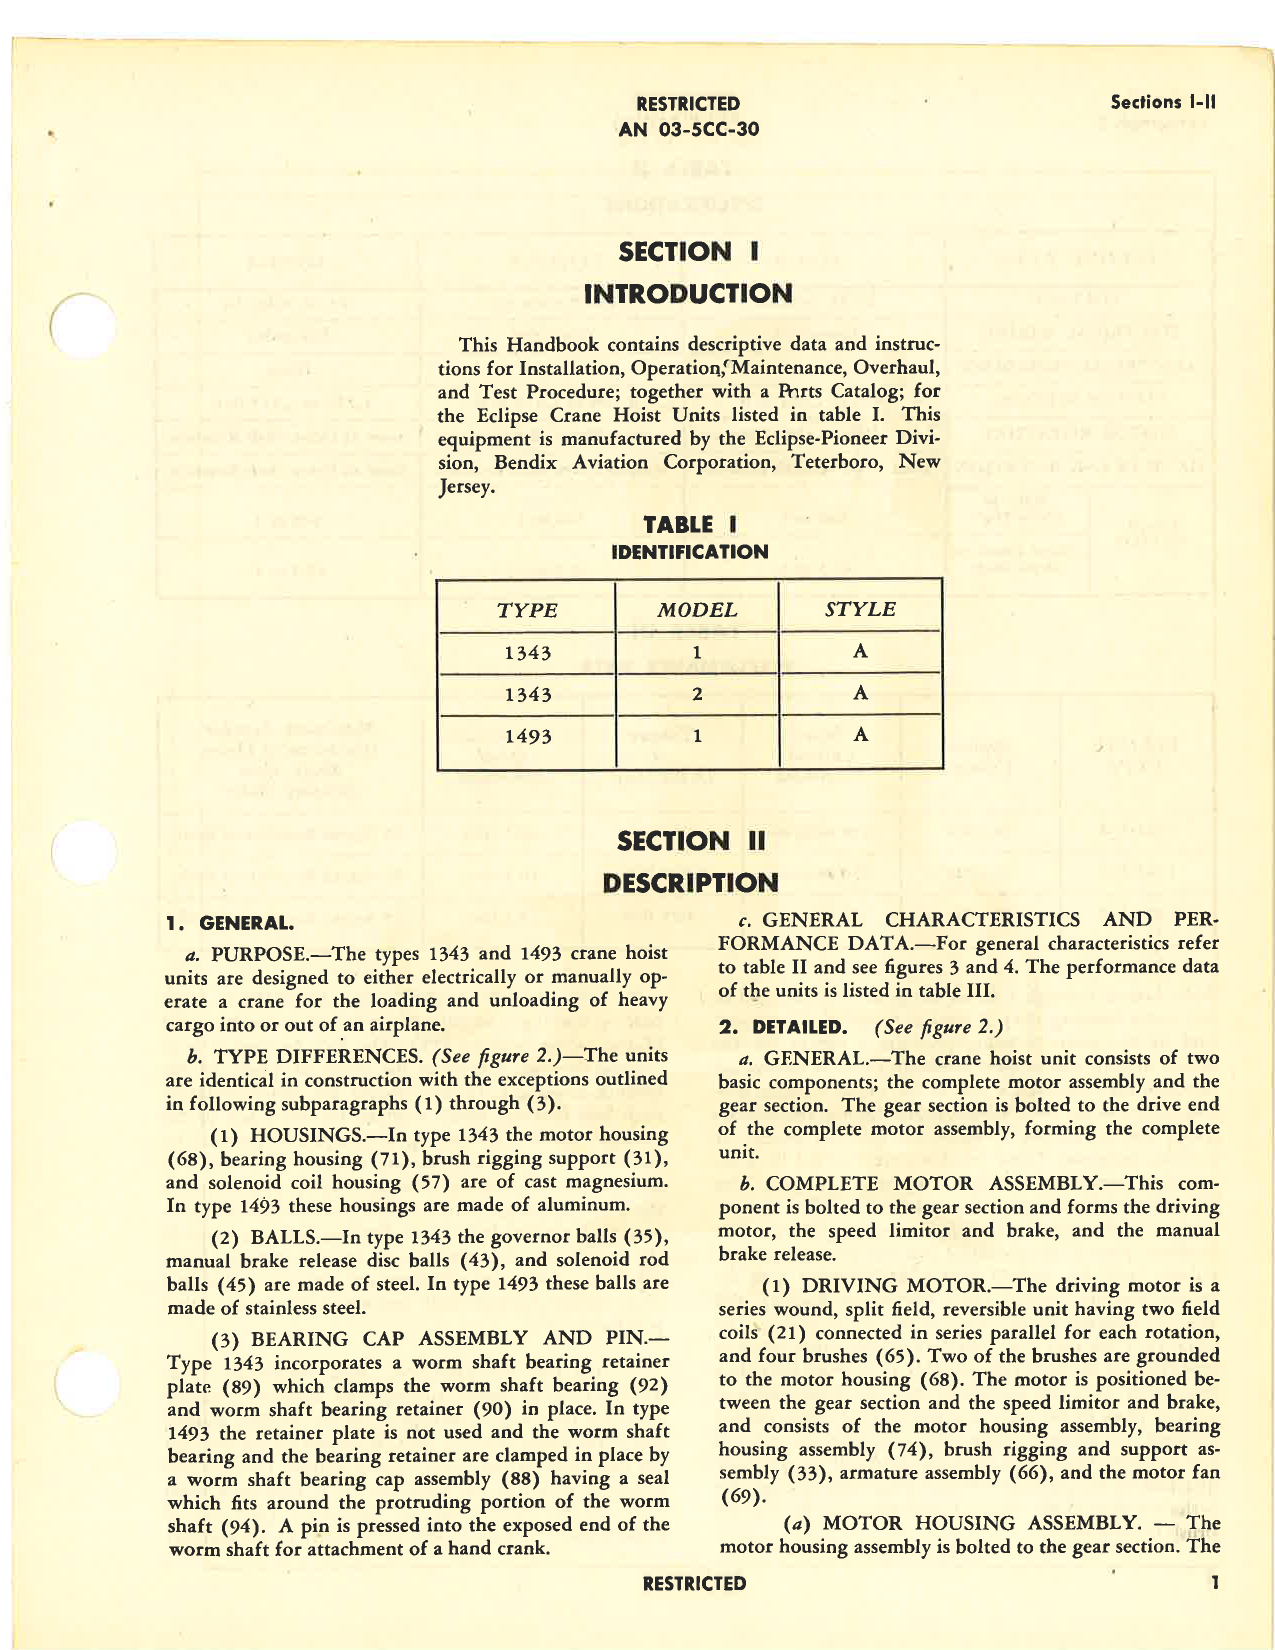 Sample page 5 from AirCorps Library document: Operation, Service & Overhaul Instructions with Parts Catalog for Crane Hoist Units